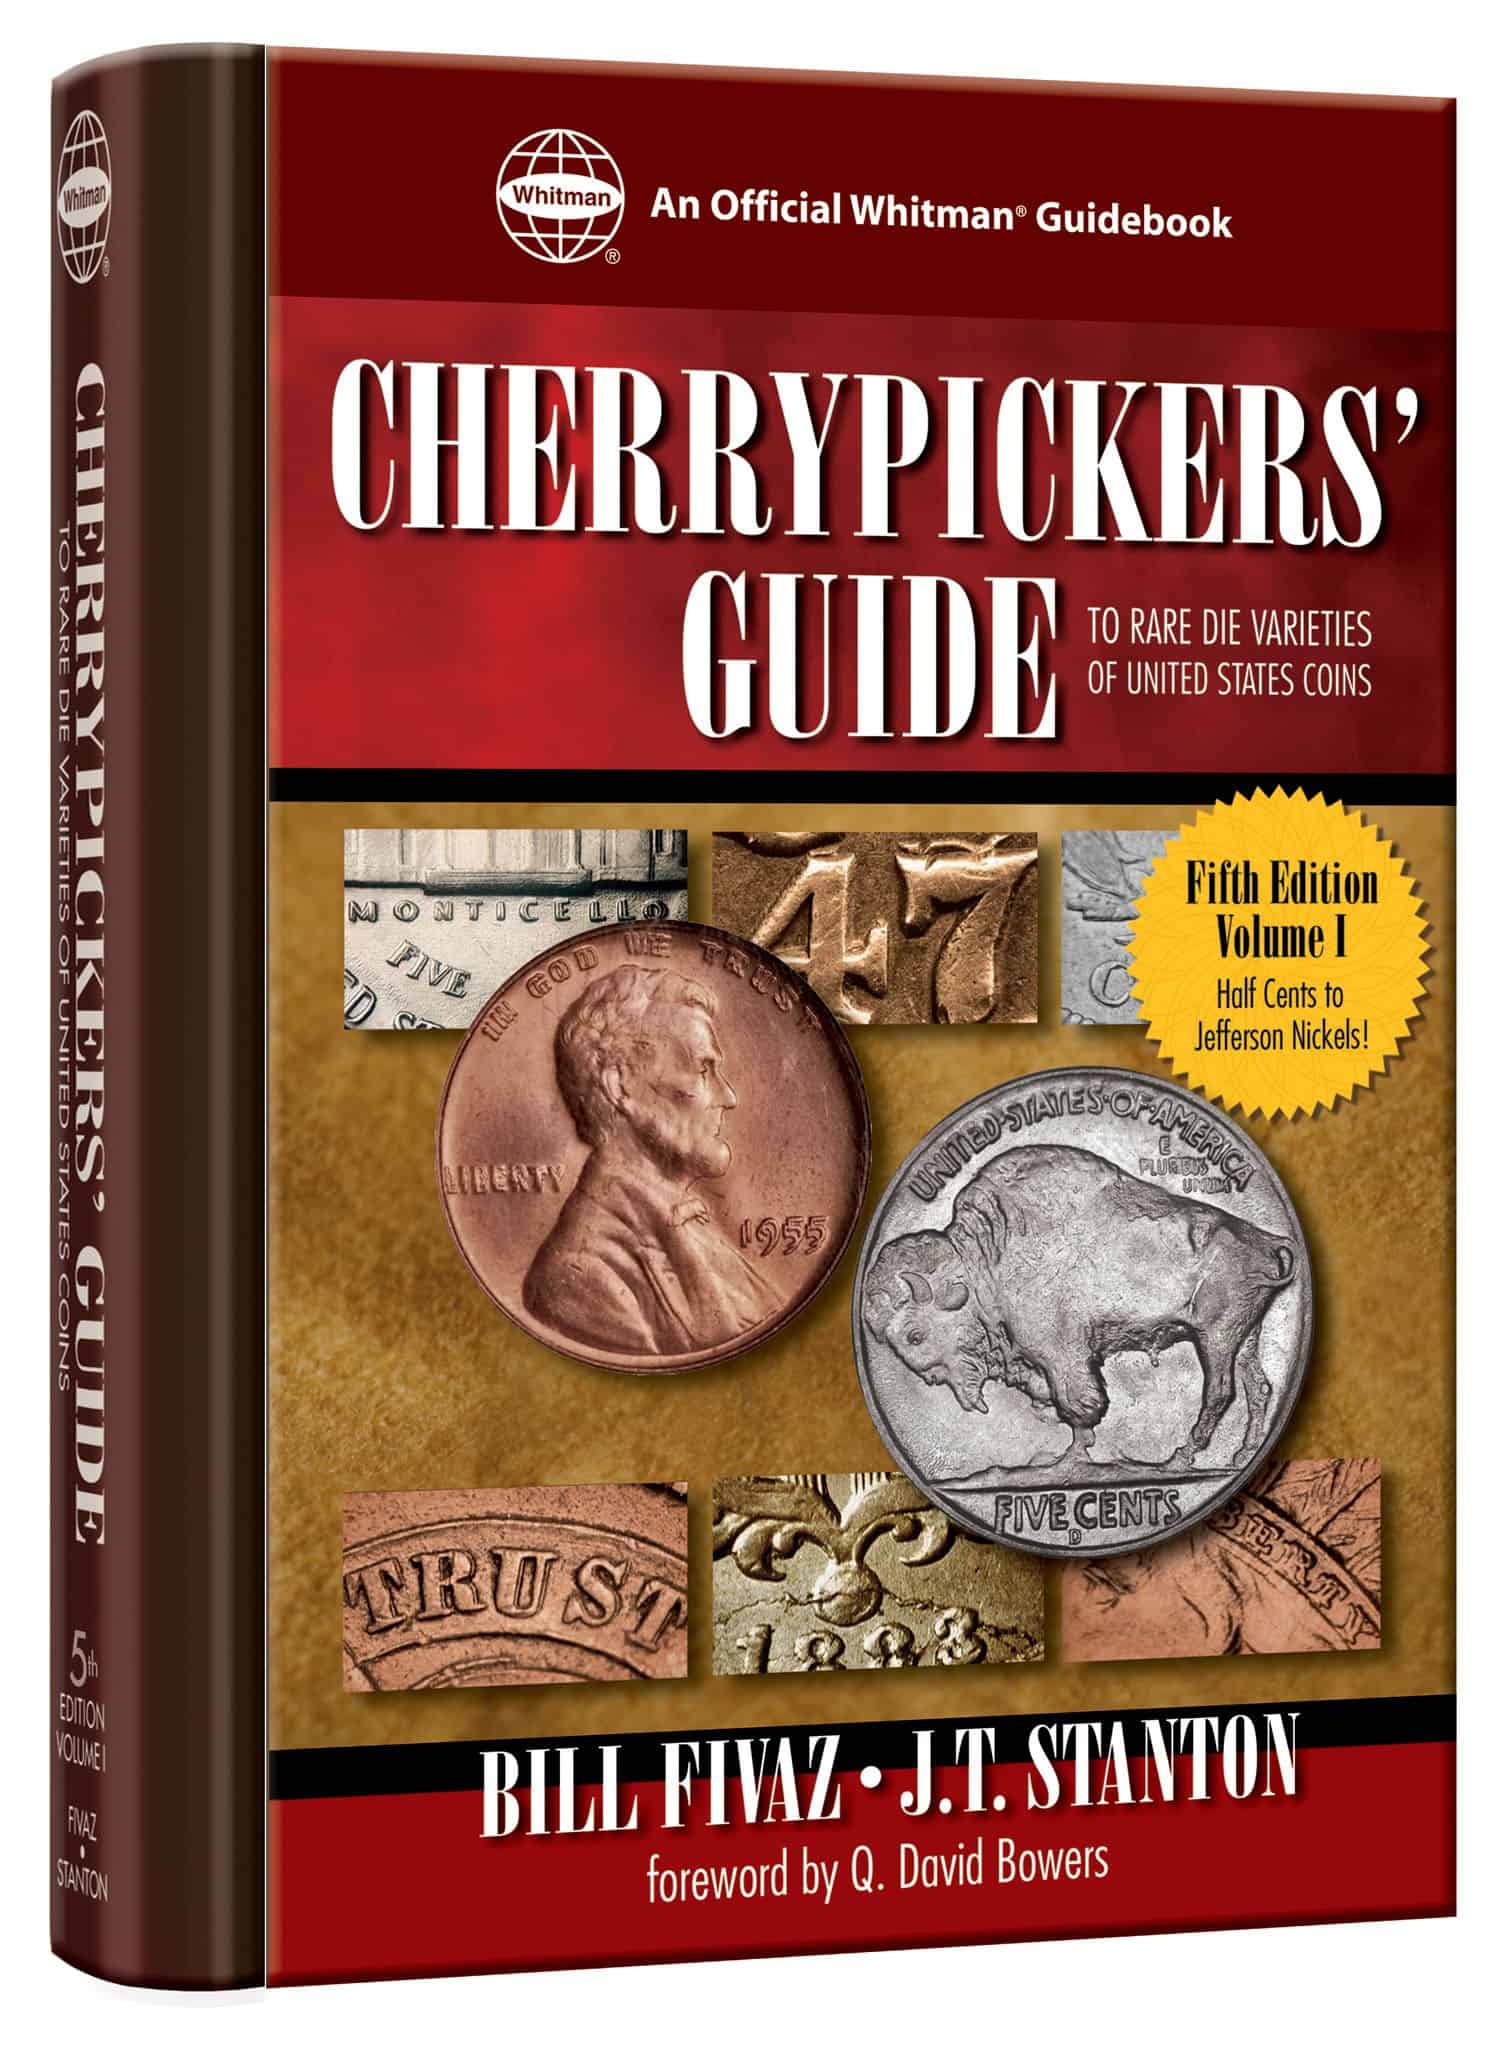 Cherrypickers' Guide To Rare Die Varieties of United States Coins